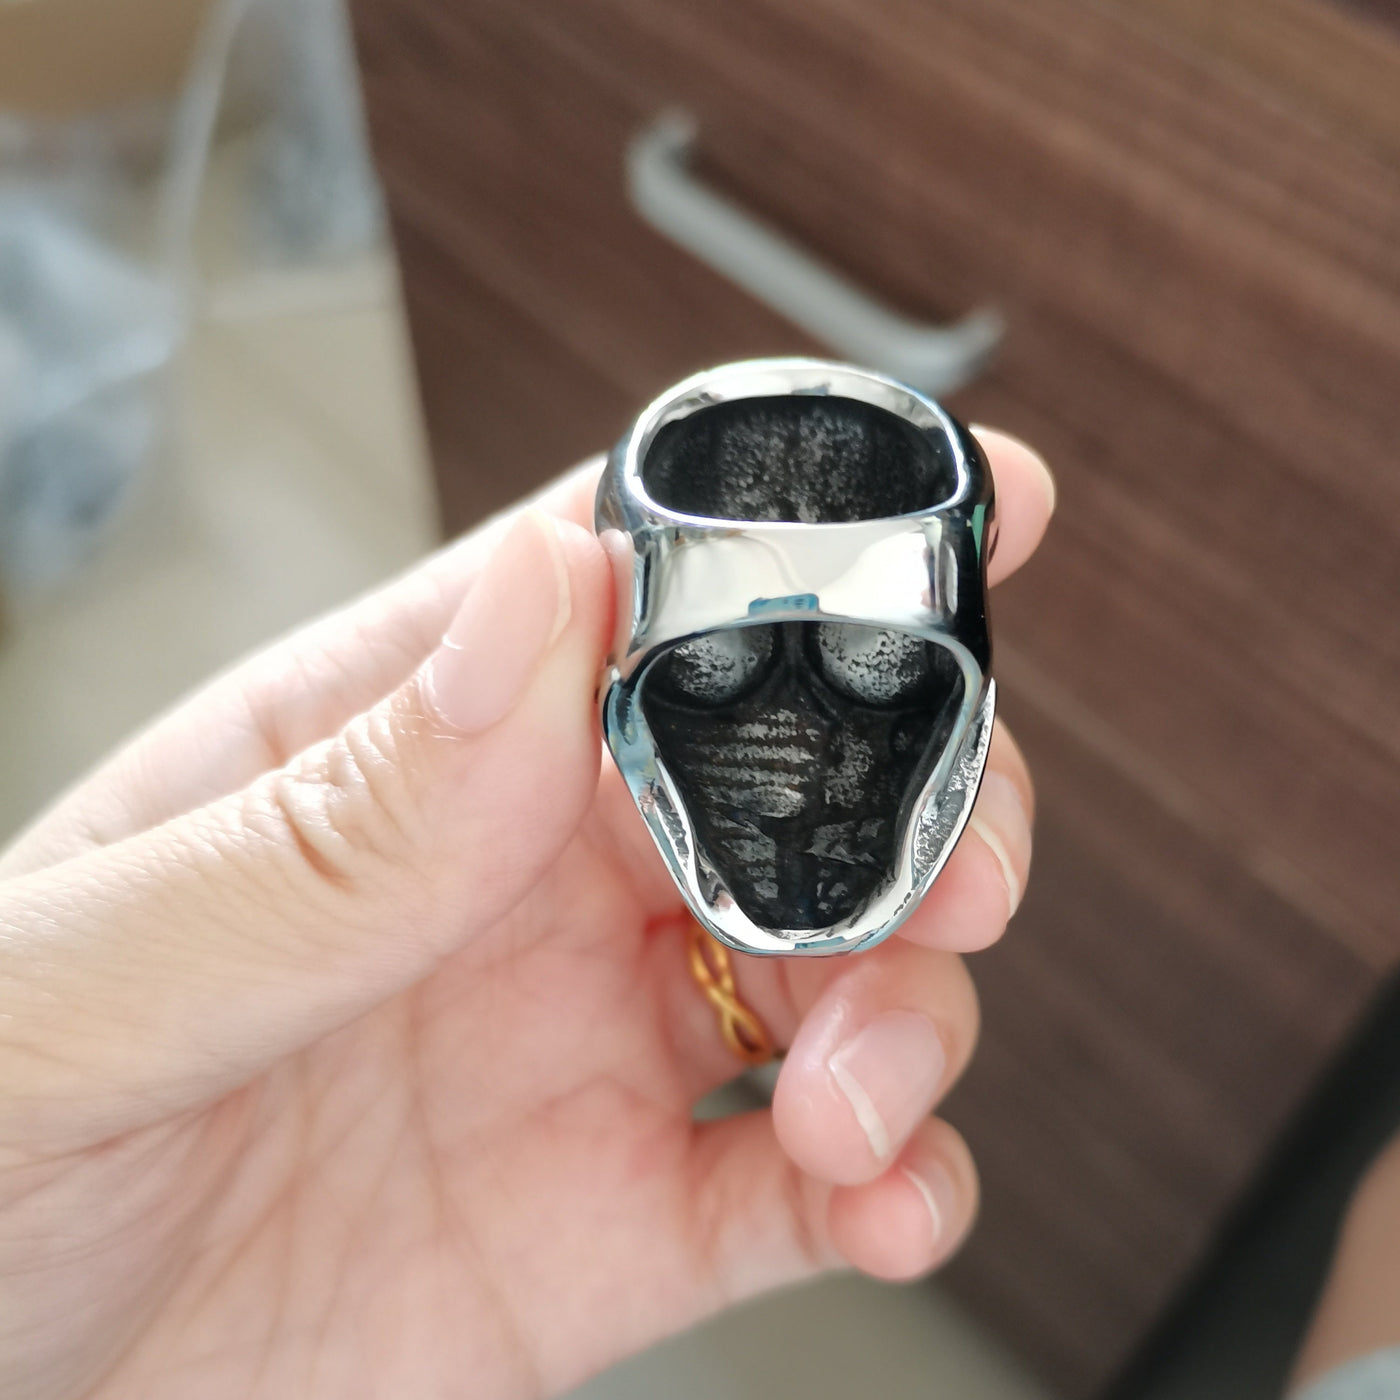 A person holding a Stainless Steel Men's American Flag Skull Ring, Silver Color.